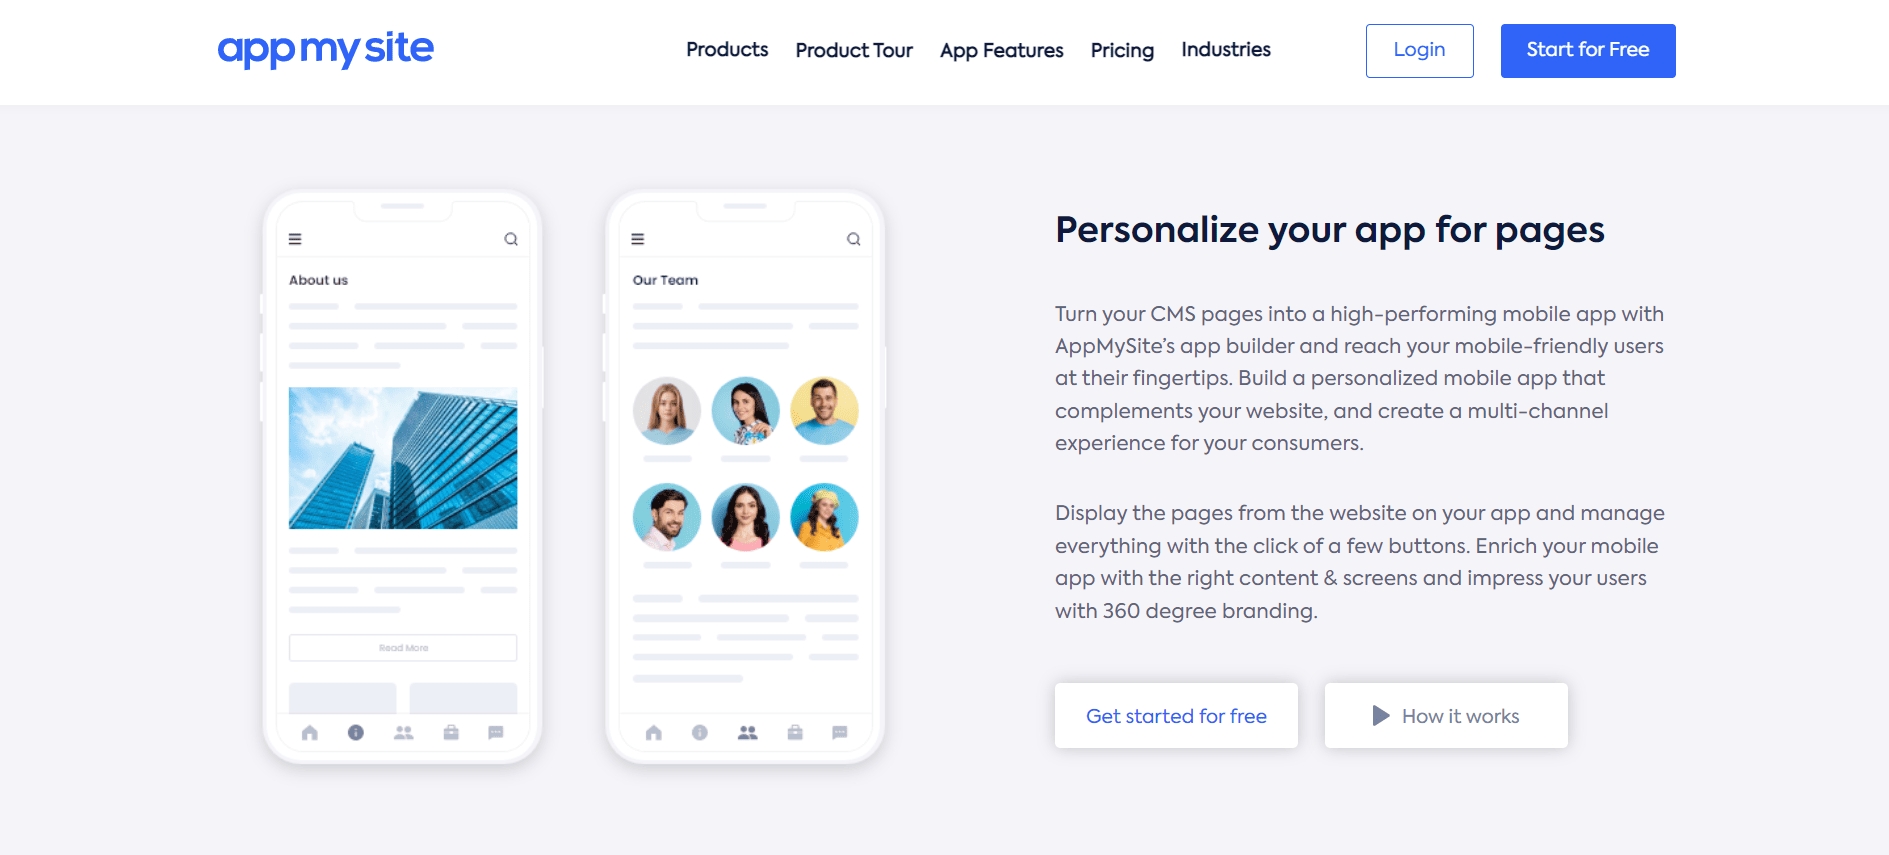 appmysite page personalization